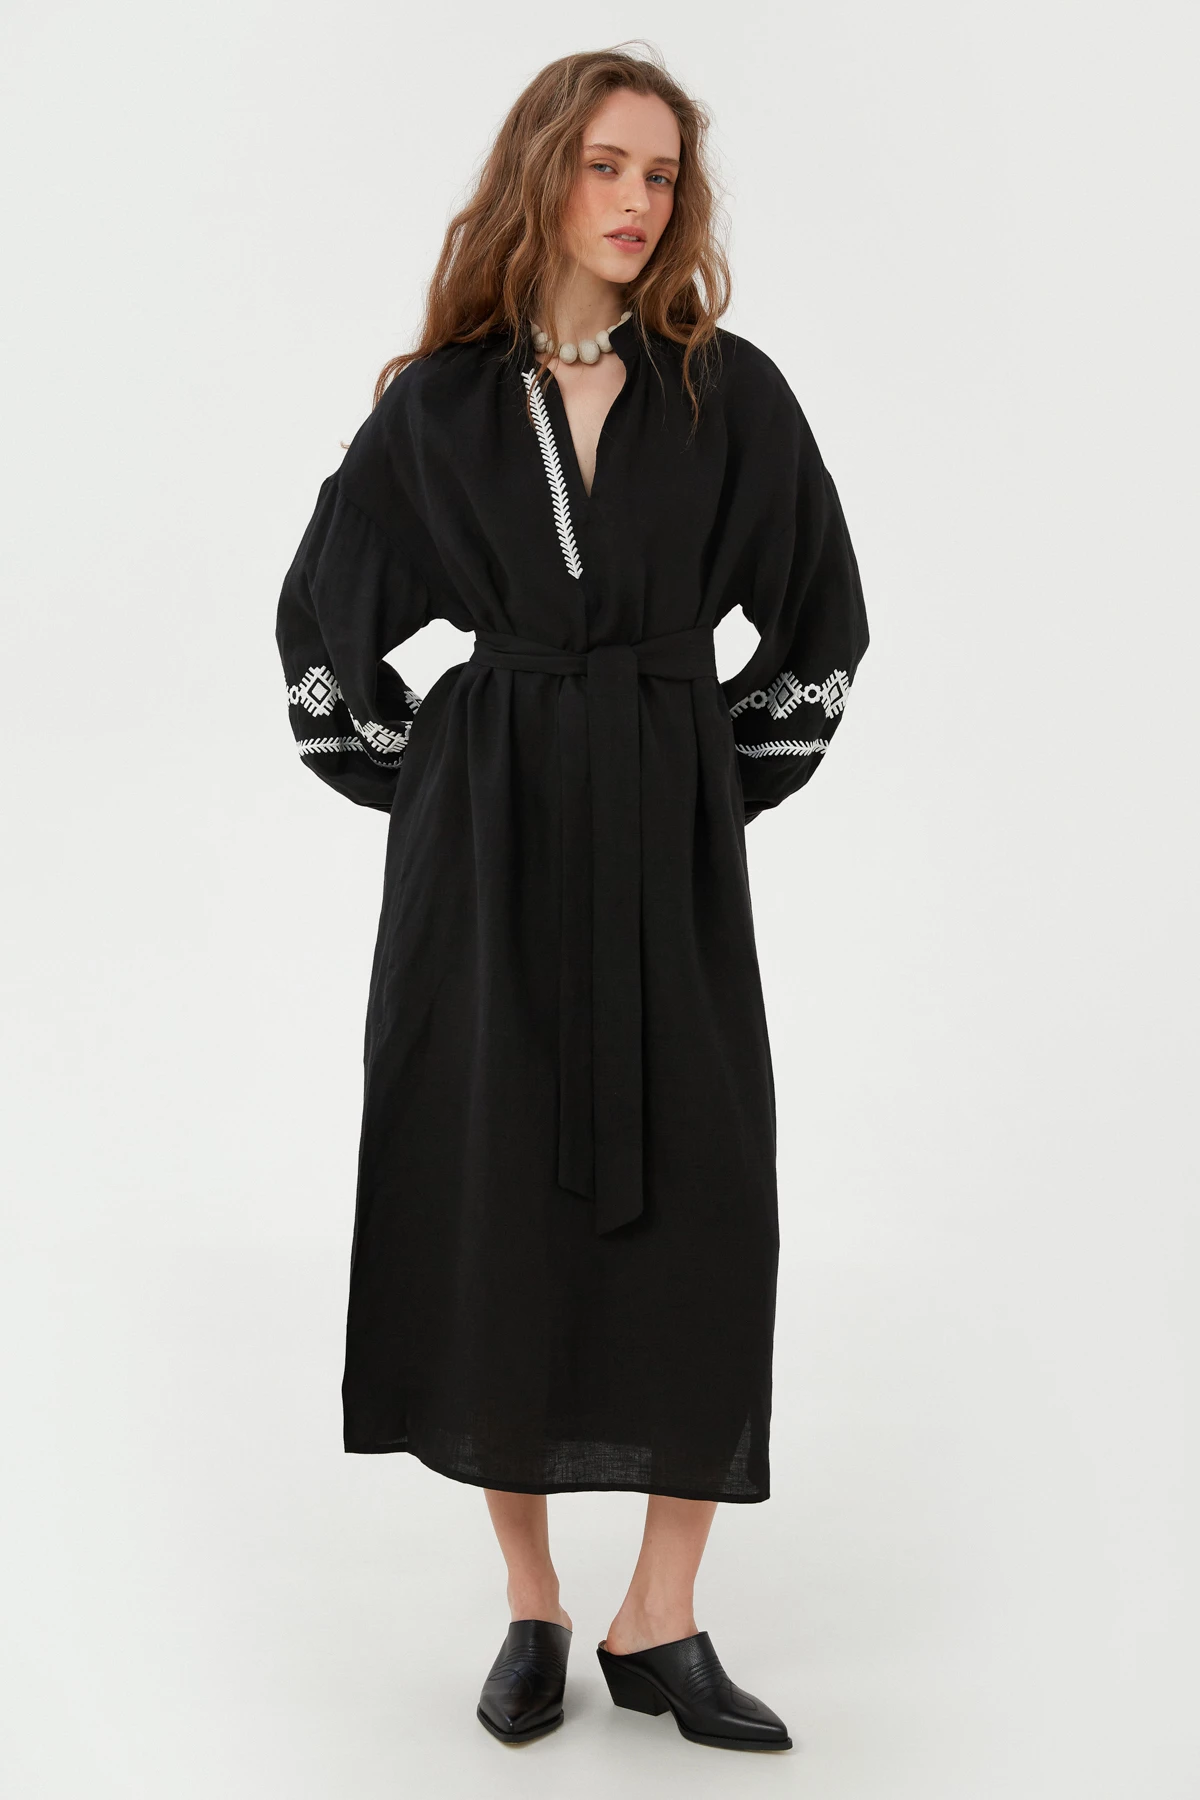 Black linen vyshyvanka dress with floral embroidery, photo 1